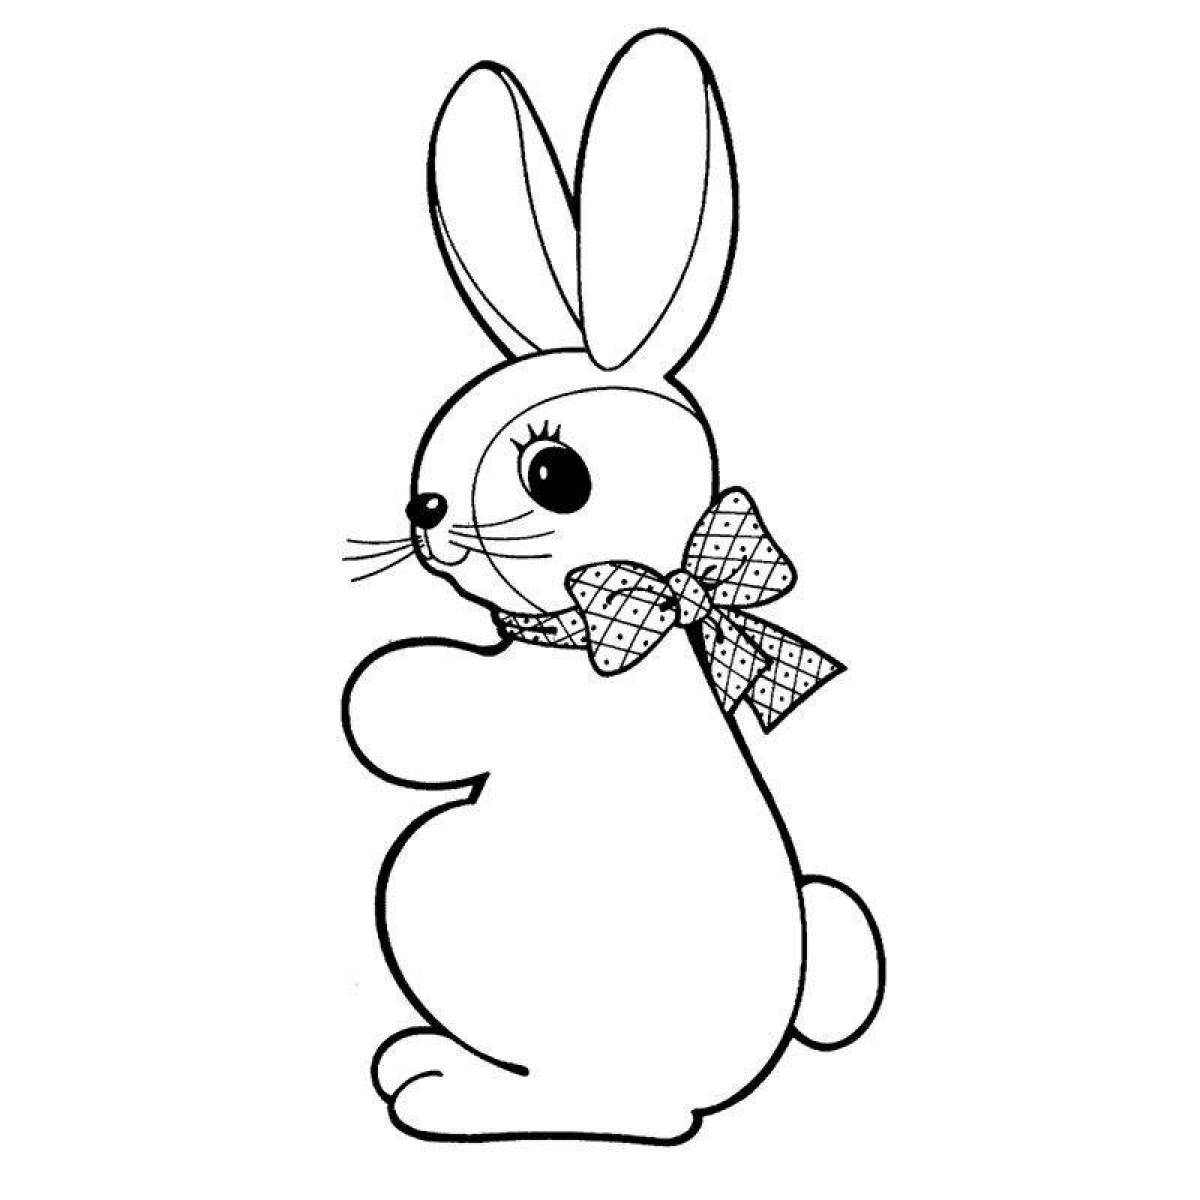 Fun coloring picture of a rabbit